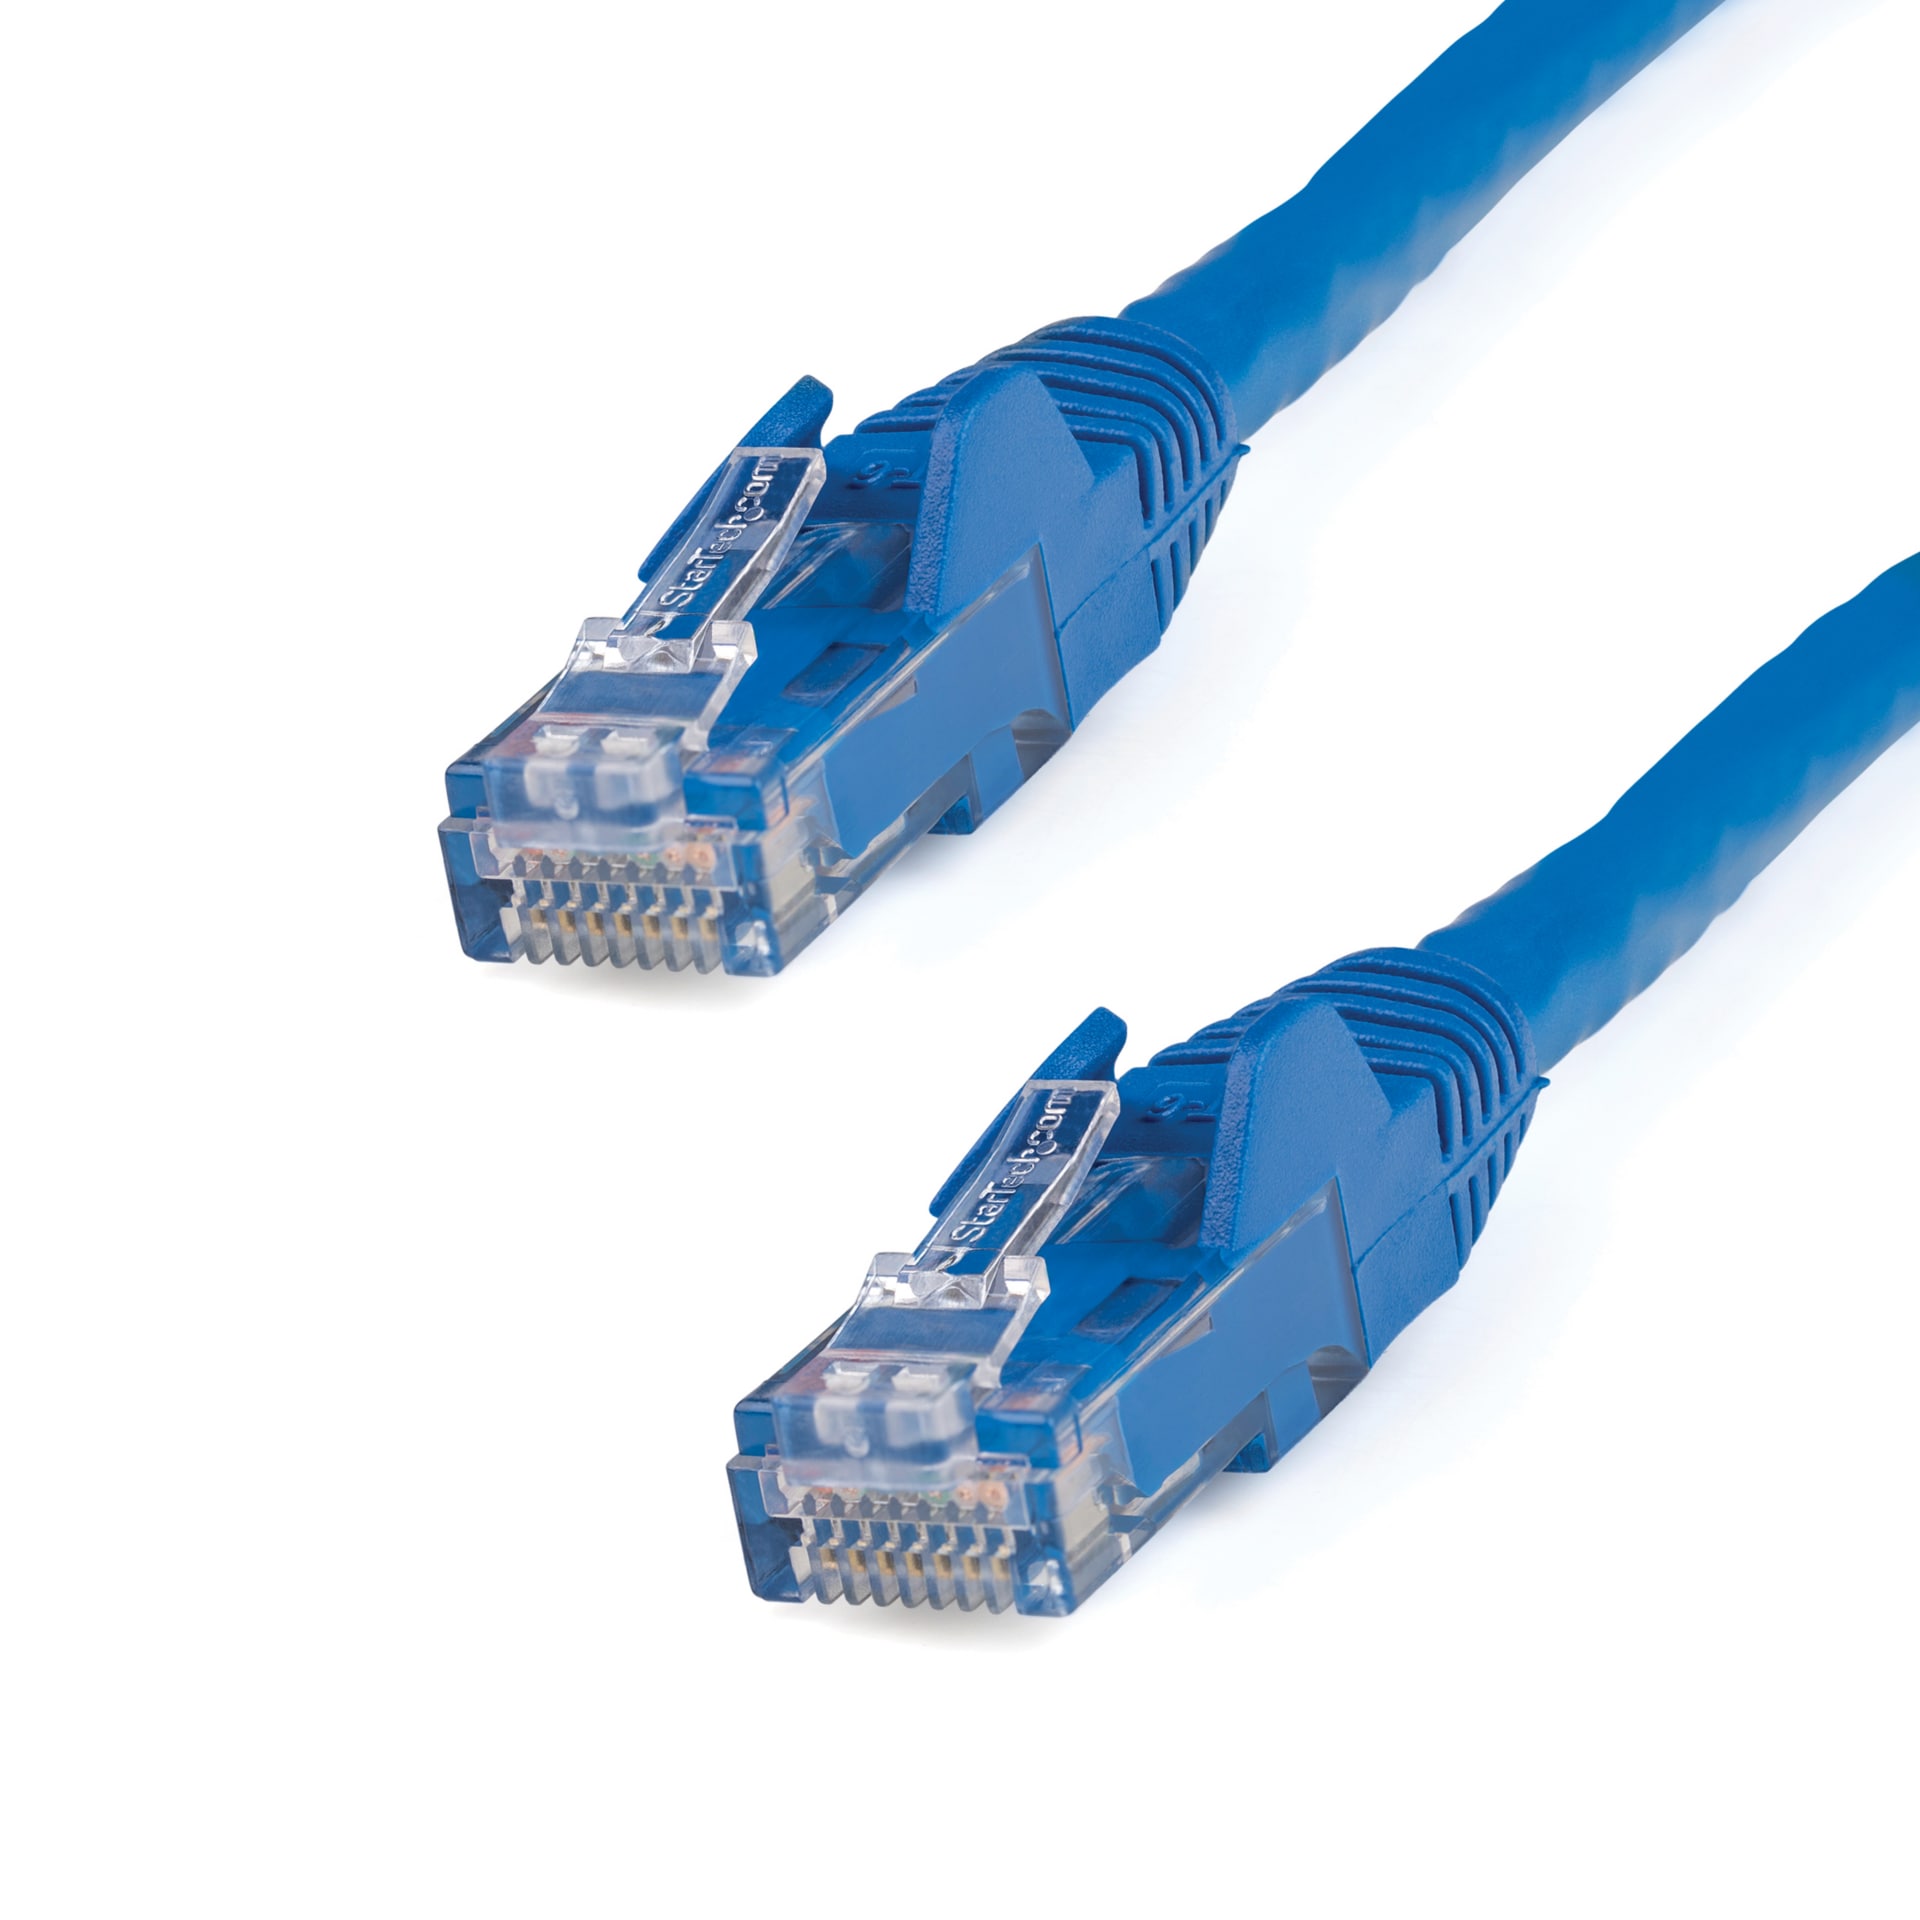 StarTech.com CAT6 Ethernet Cable 1' Blue 650MHz CAT 6 Snagless Patch Cord